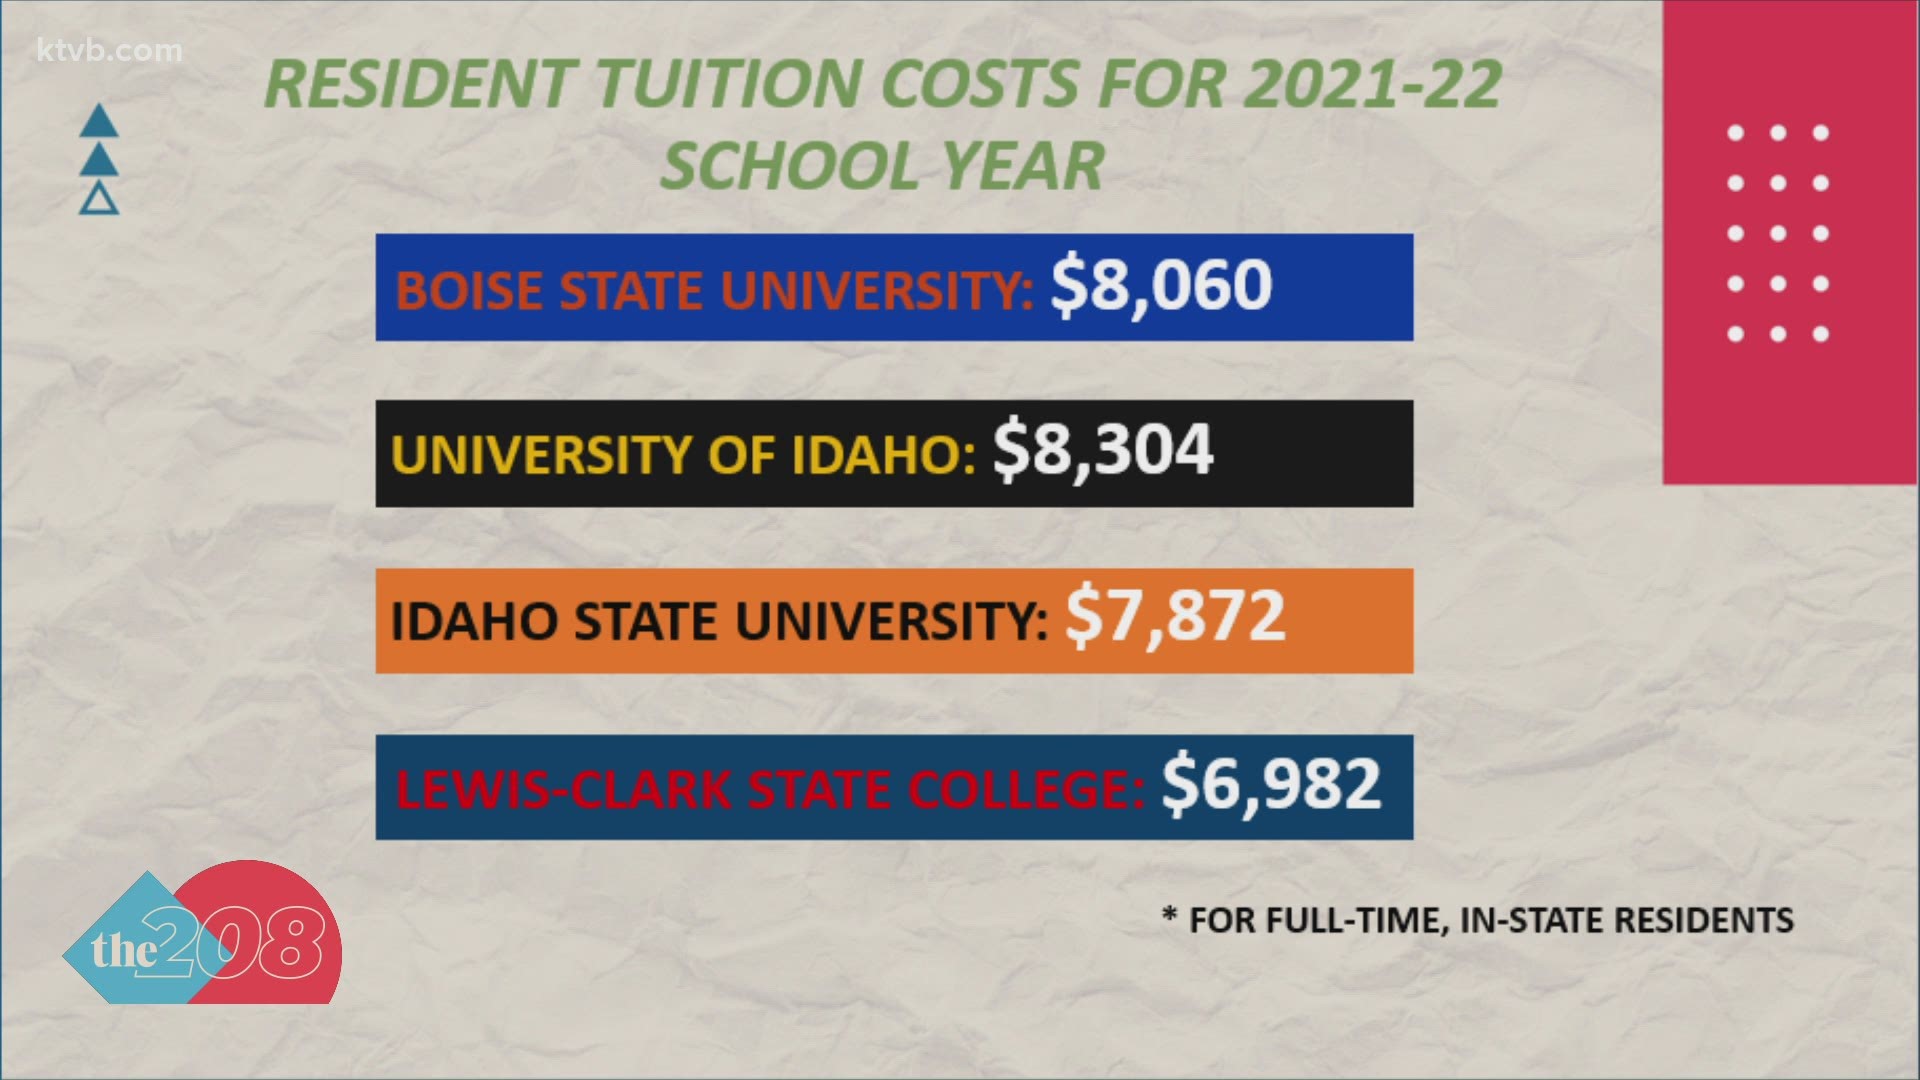 The Idaho State Board of Education voted to keep tuition for Idaho residents at the current rate for the 2021-22 academic year.